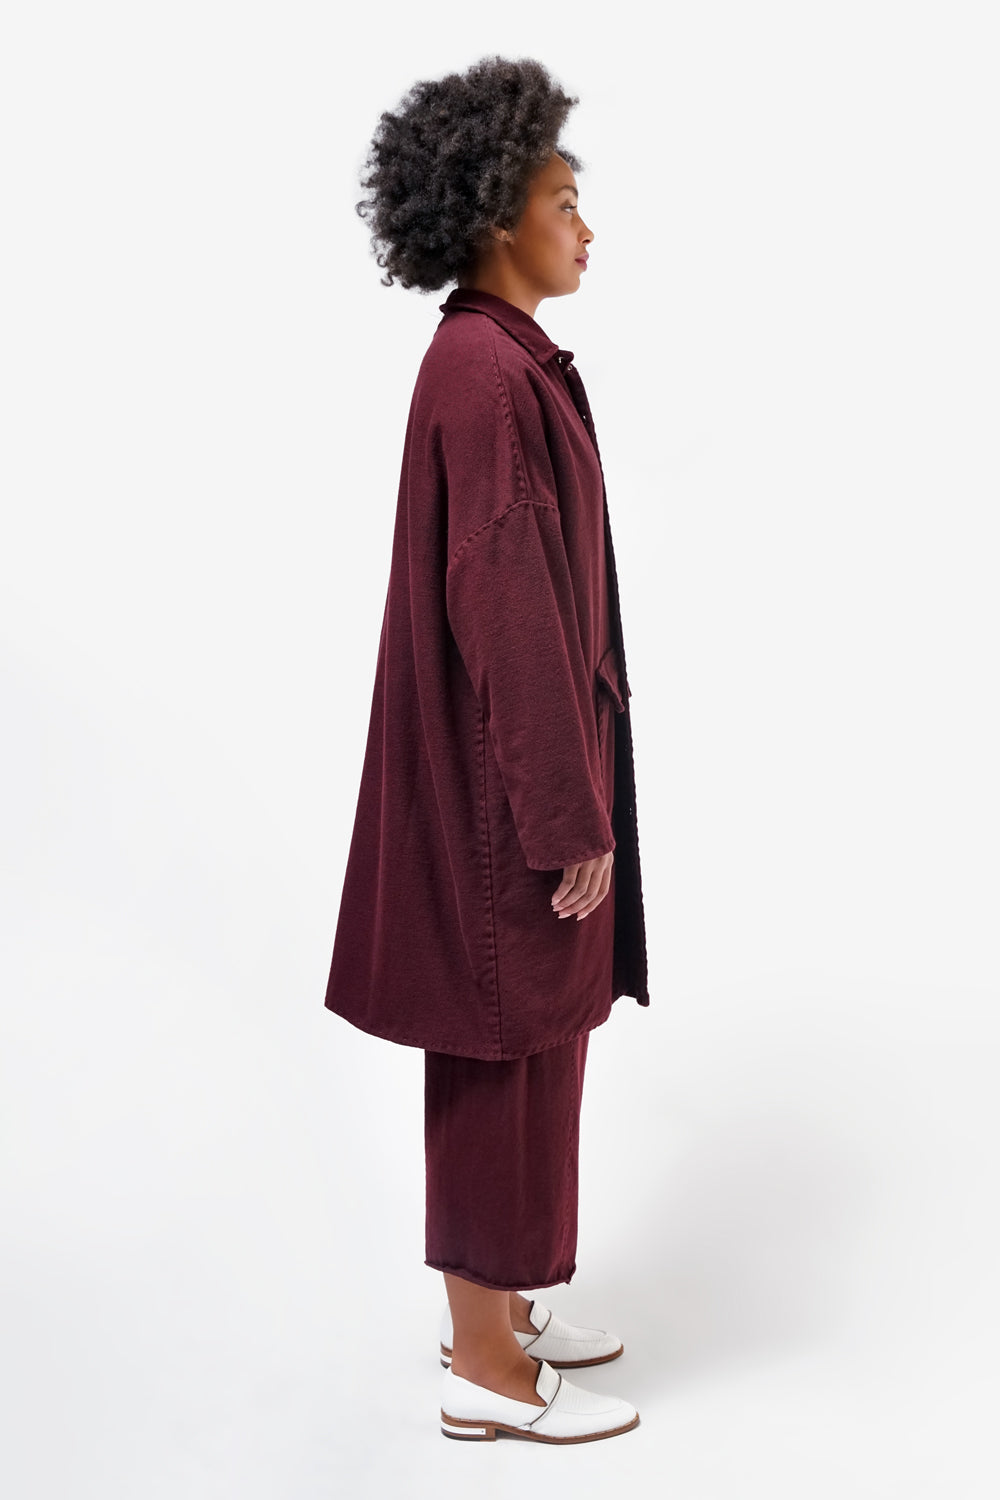 The School of Making model wearing the  Car Coat in plum. Made with 100% organic cotton.